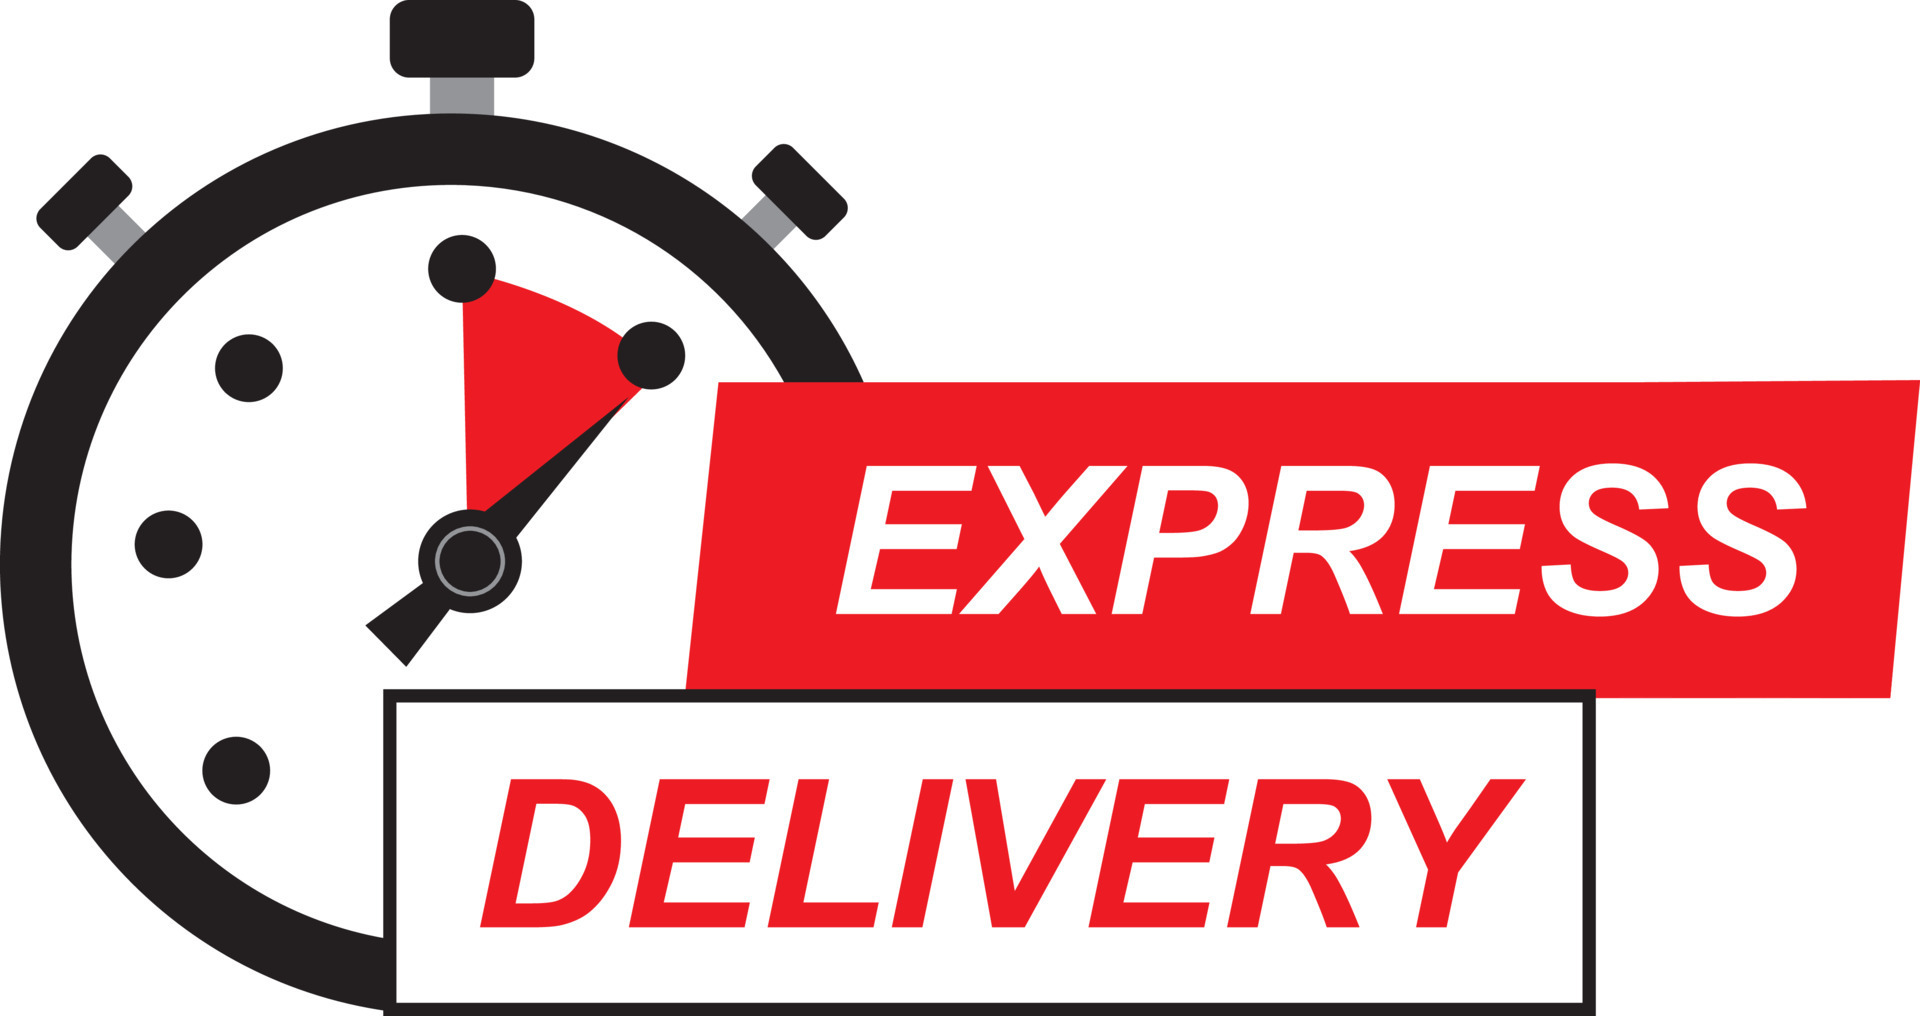 Express delivery icon. Fast, express and urgent delivery, services